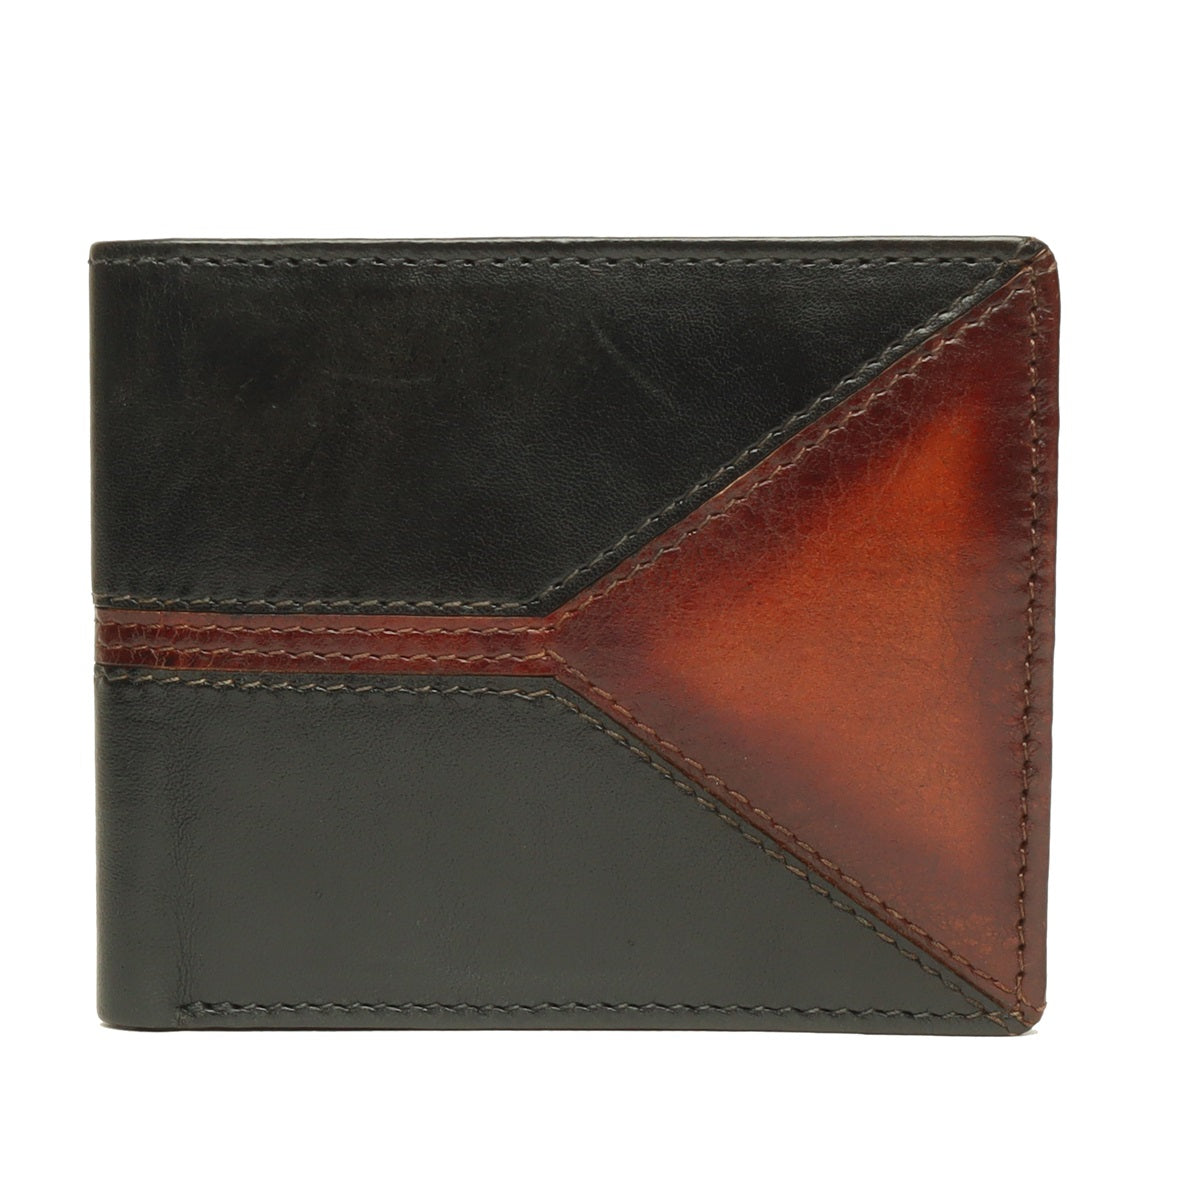 Tan/Black Combination Leather With Contrast Stitched Bifold Wallet By Brune